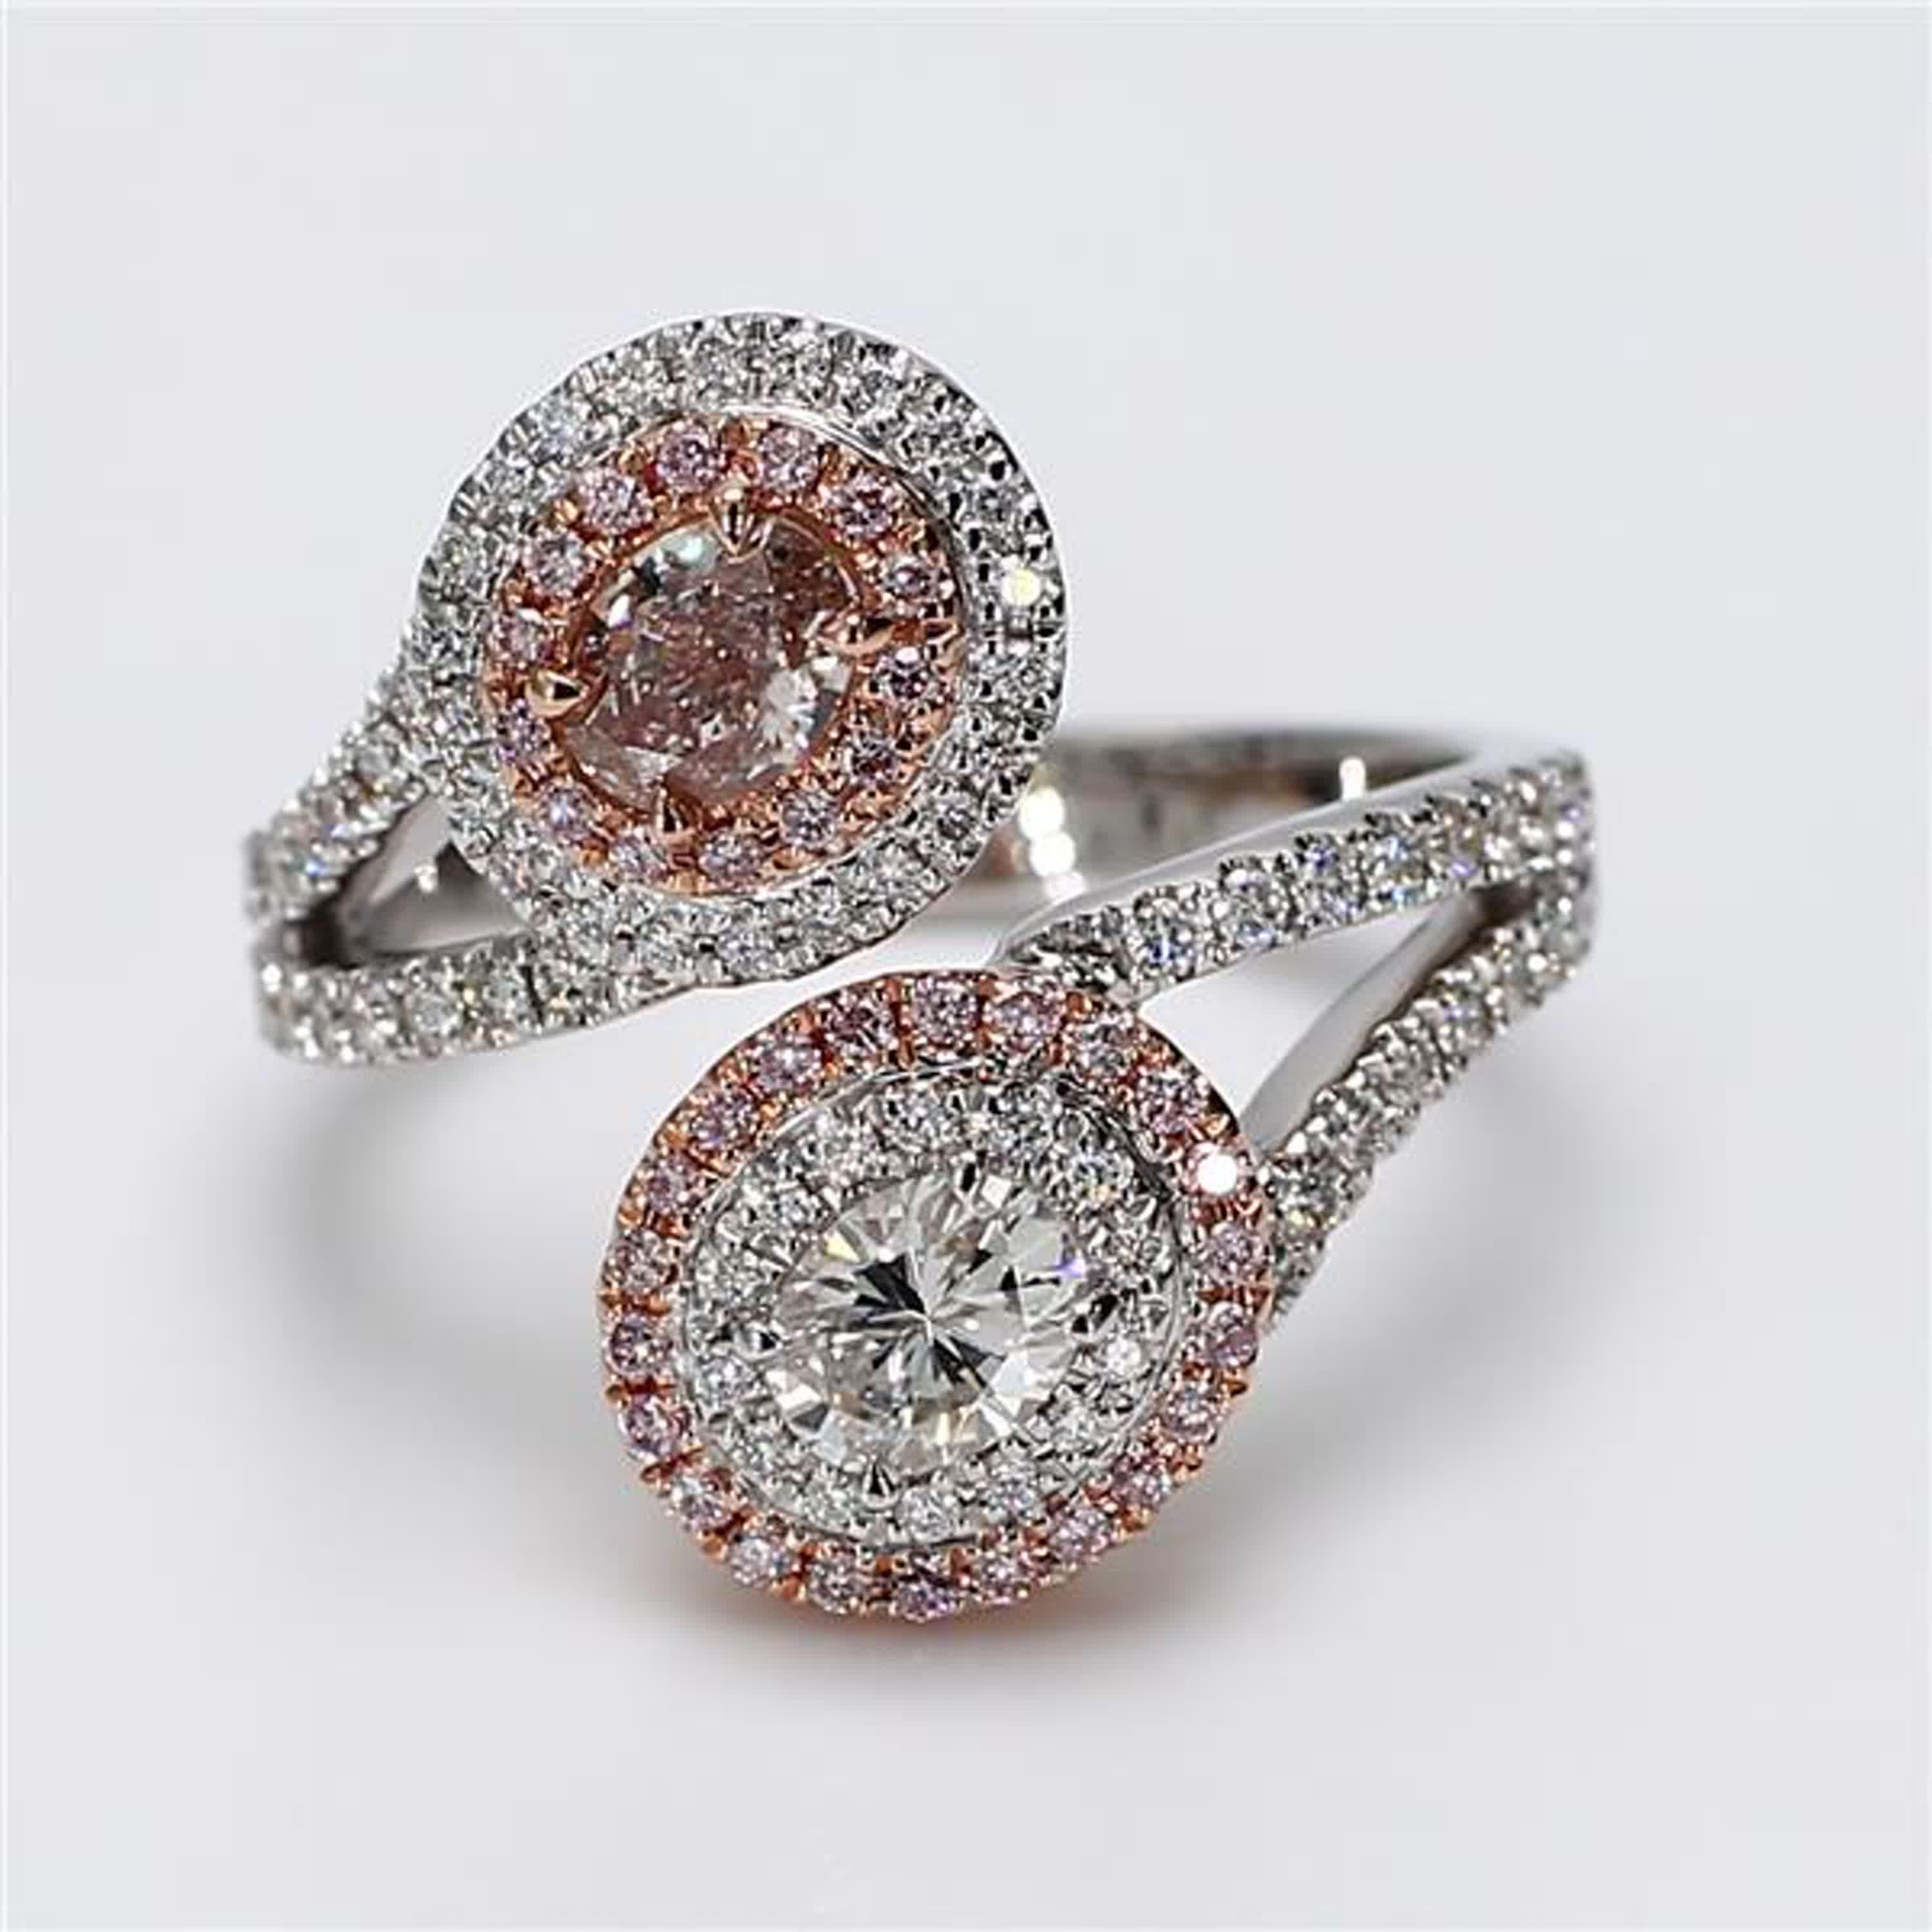 RareGemWorld's classic GIA certified diamond ring. Mounted in a beautiful 18K Yellow and White Gold setting with a natural oval cut pink diamond as well as a natural oval cut white diamond. The oval diamonds are surrounded by round natural pink